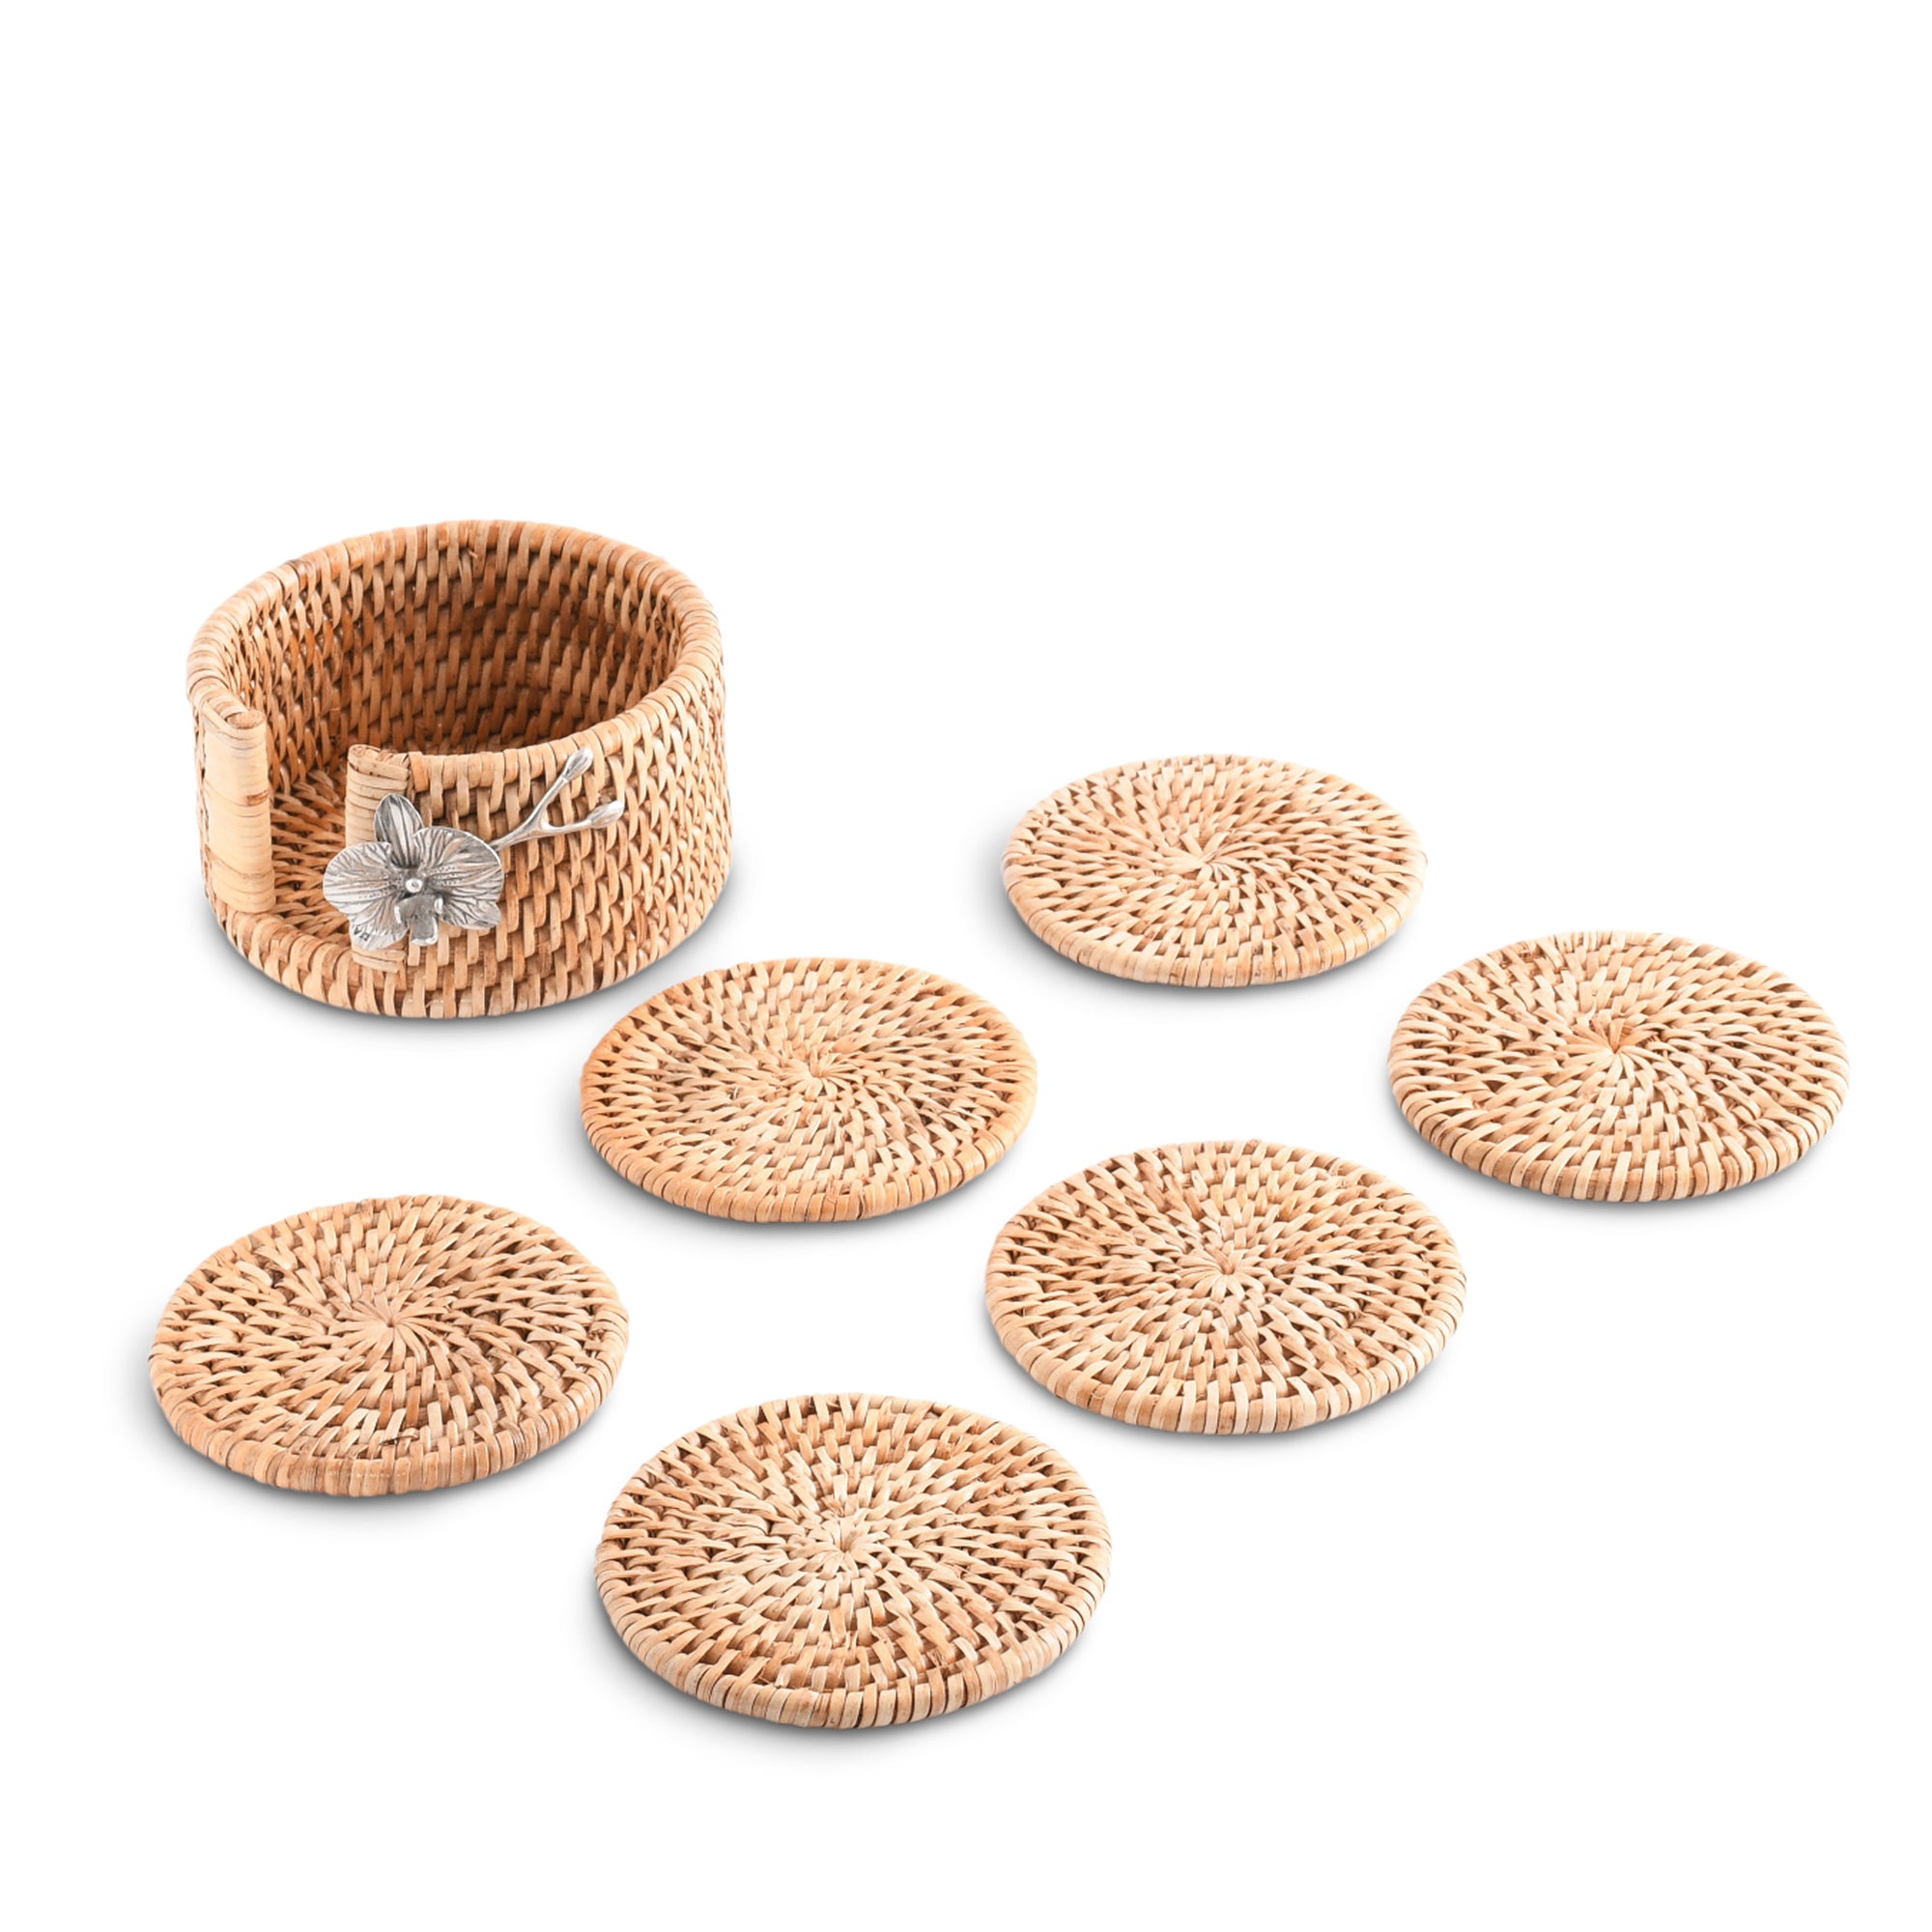 Vagabond House Orchid Hand Woven Wicker Rattan Coaster Set - 6 Coasters Product Image